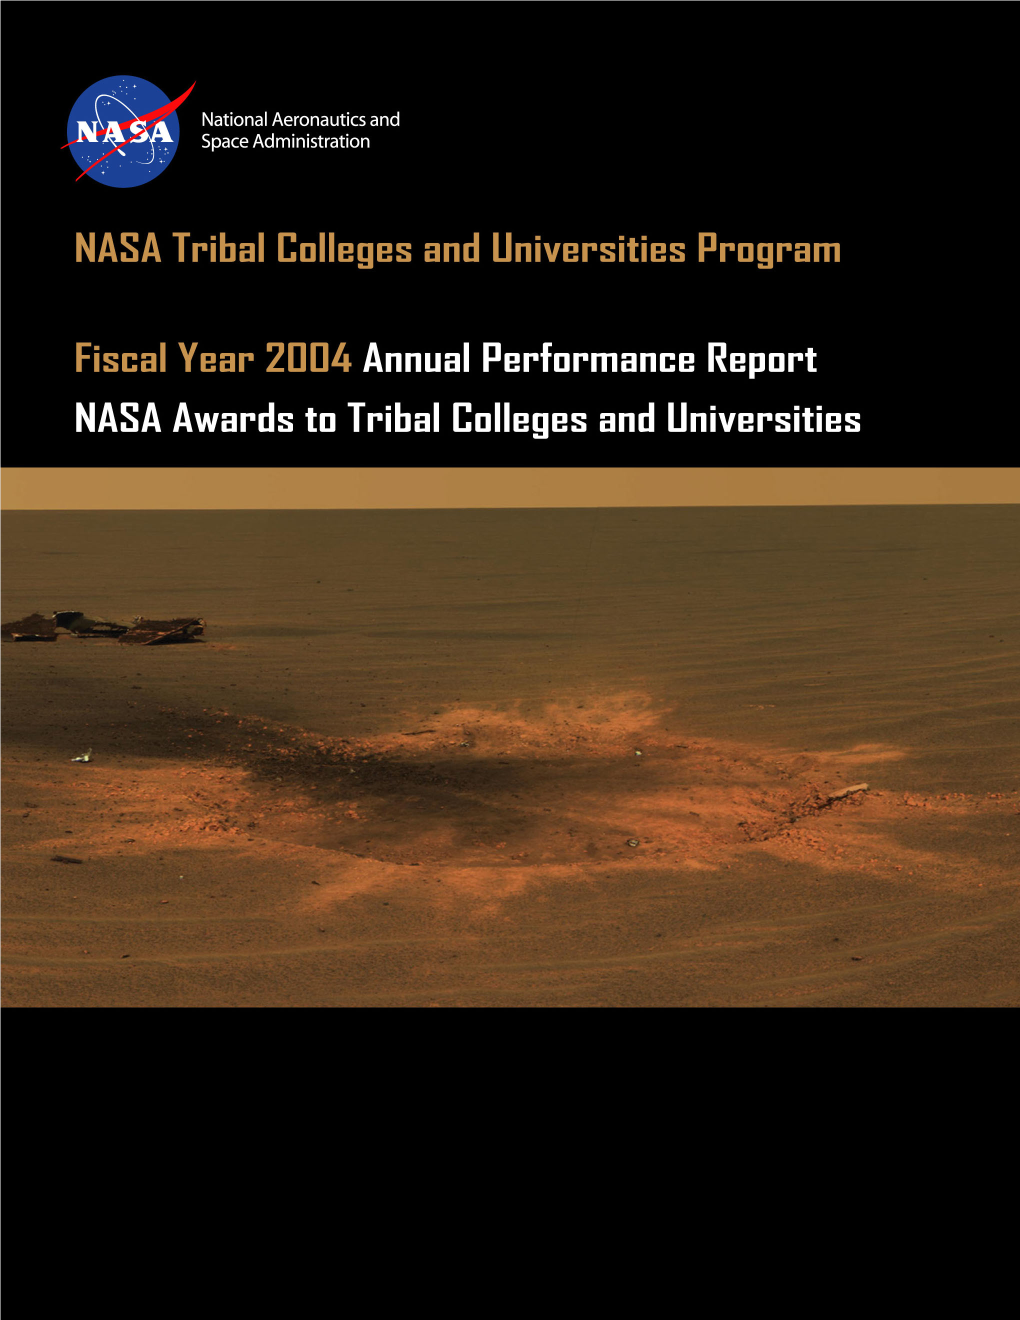 FY 2004 Agency Awards to Tribal Colleges and Universities 5